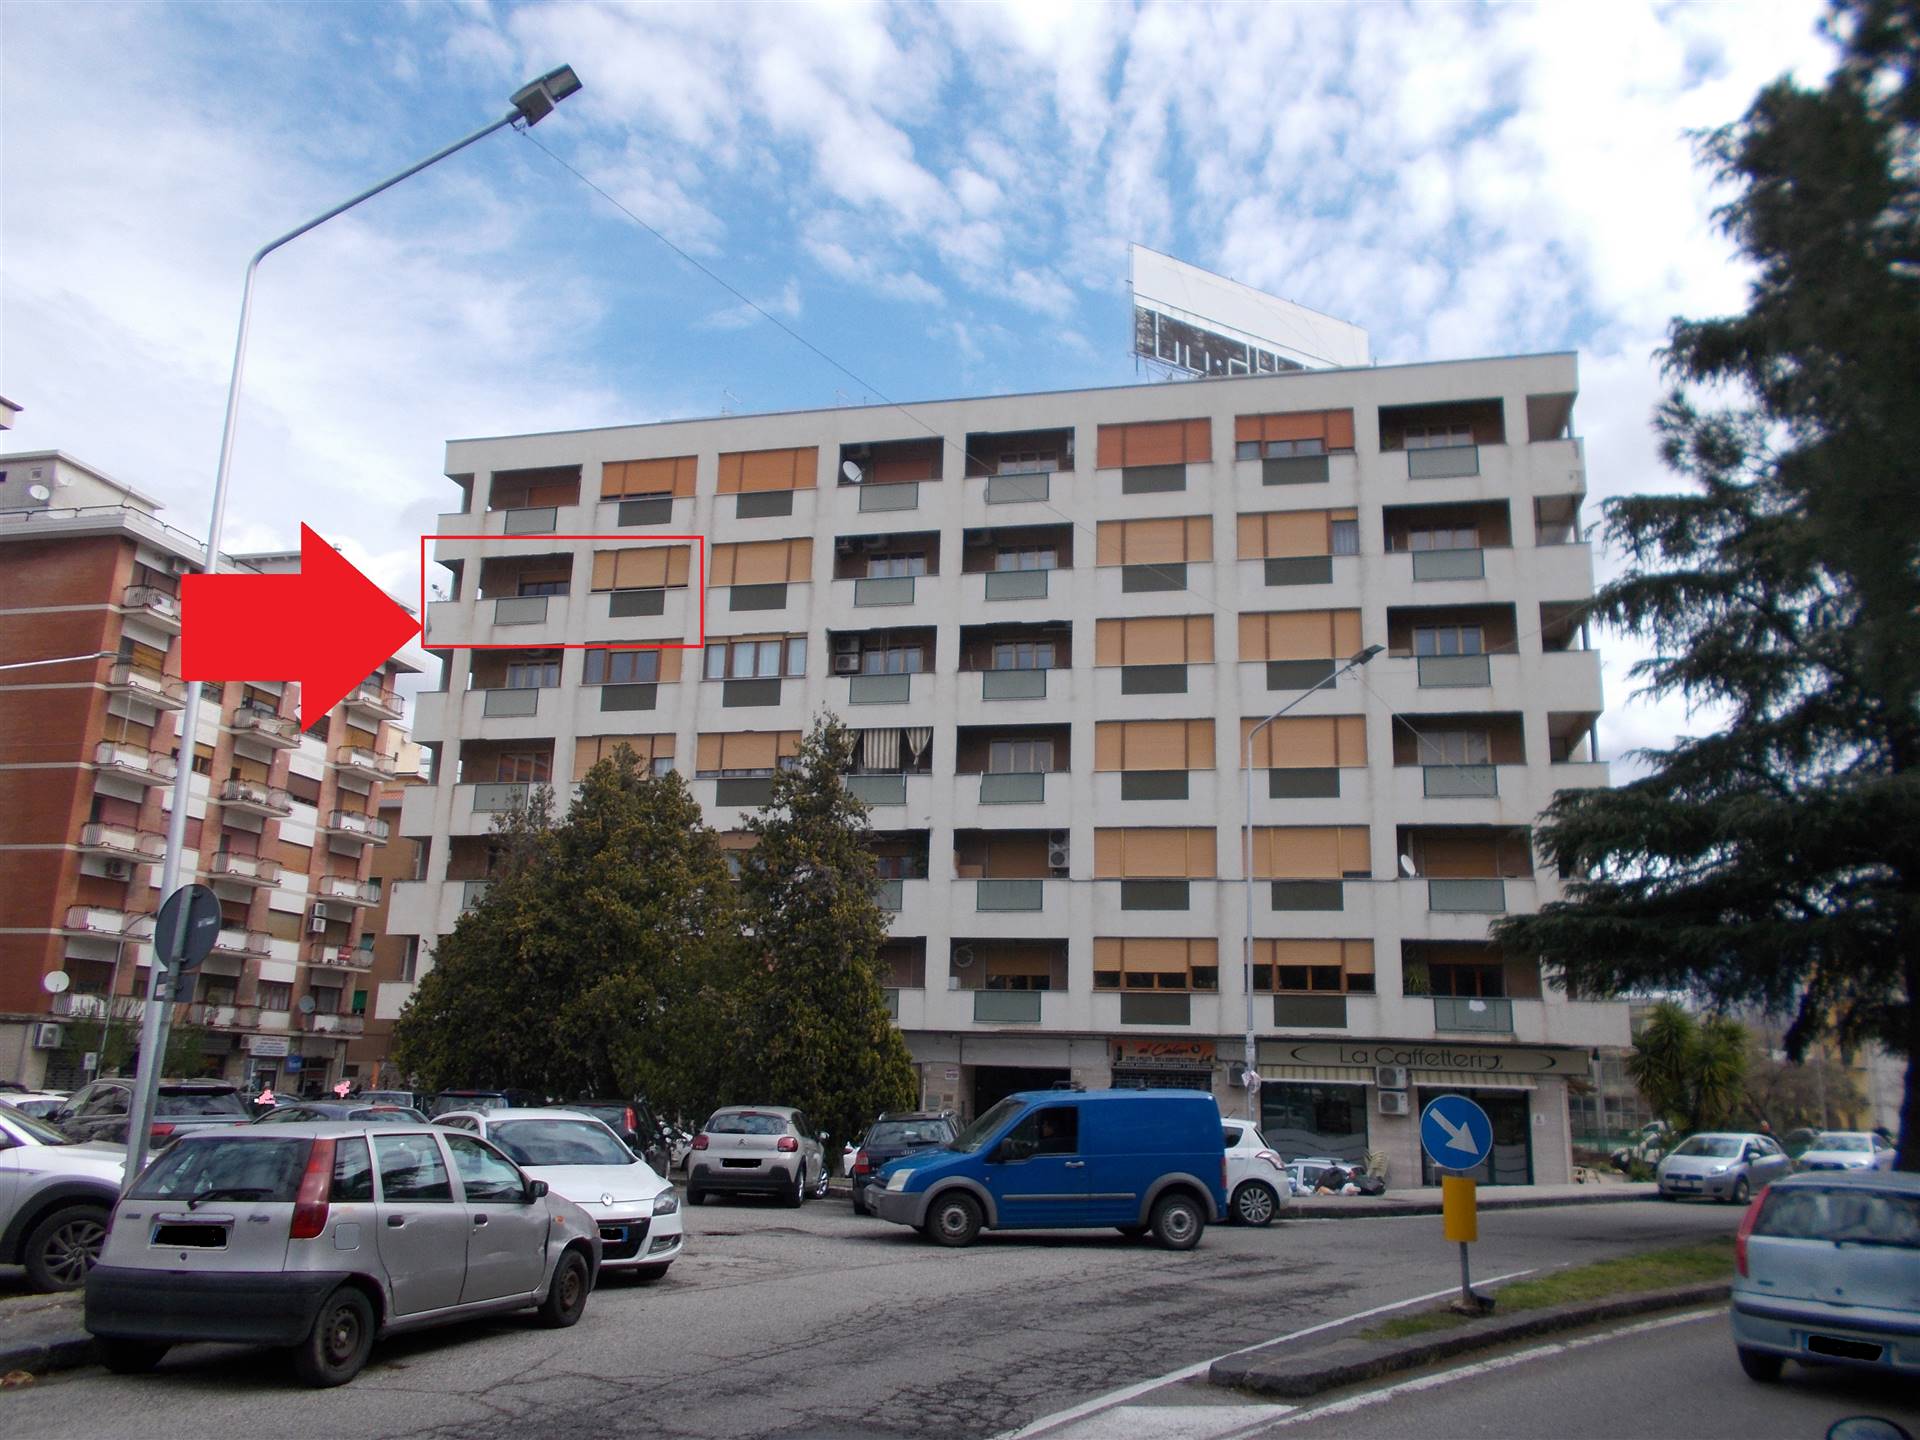 SVINCOLO AUTOSTRADA, COSENZA, Apartment for sale of 17 Sq. mt., Good condition, Heating Centralized, Energetic class: D, placed at 5°, composed by: 5 